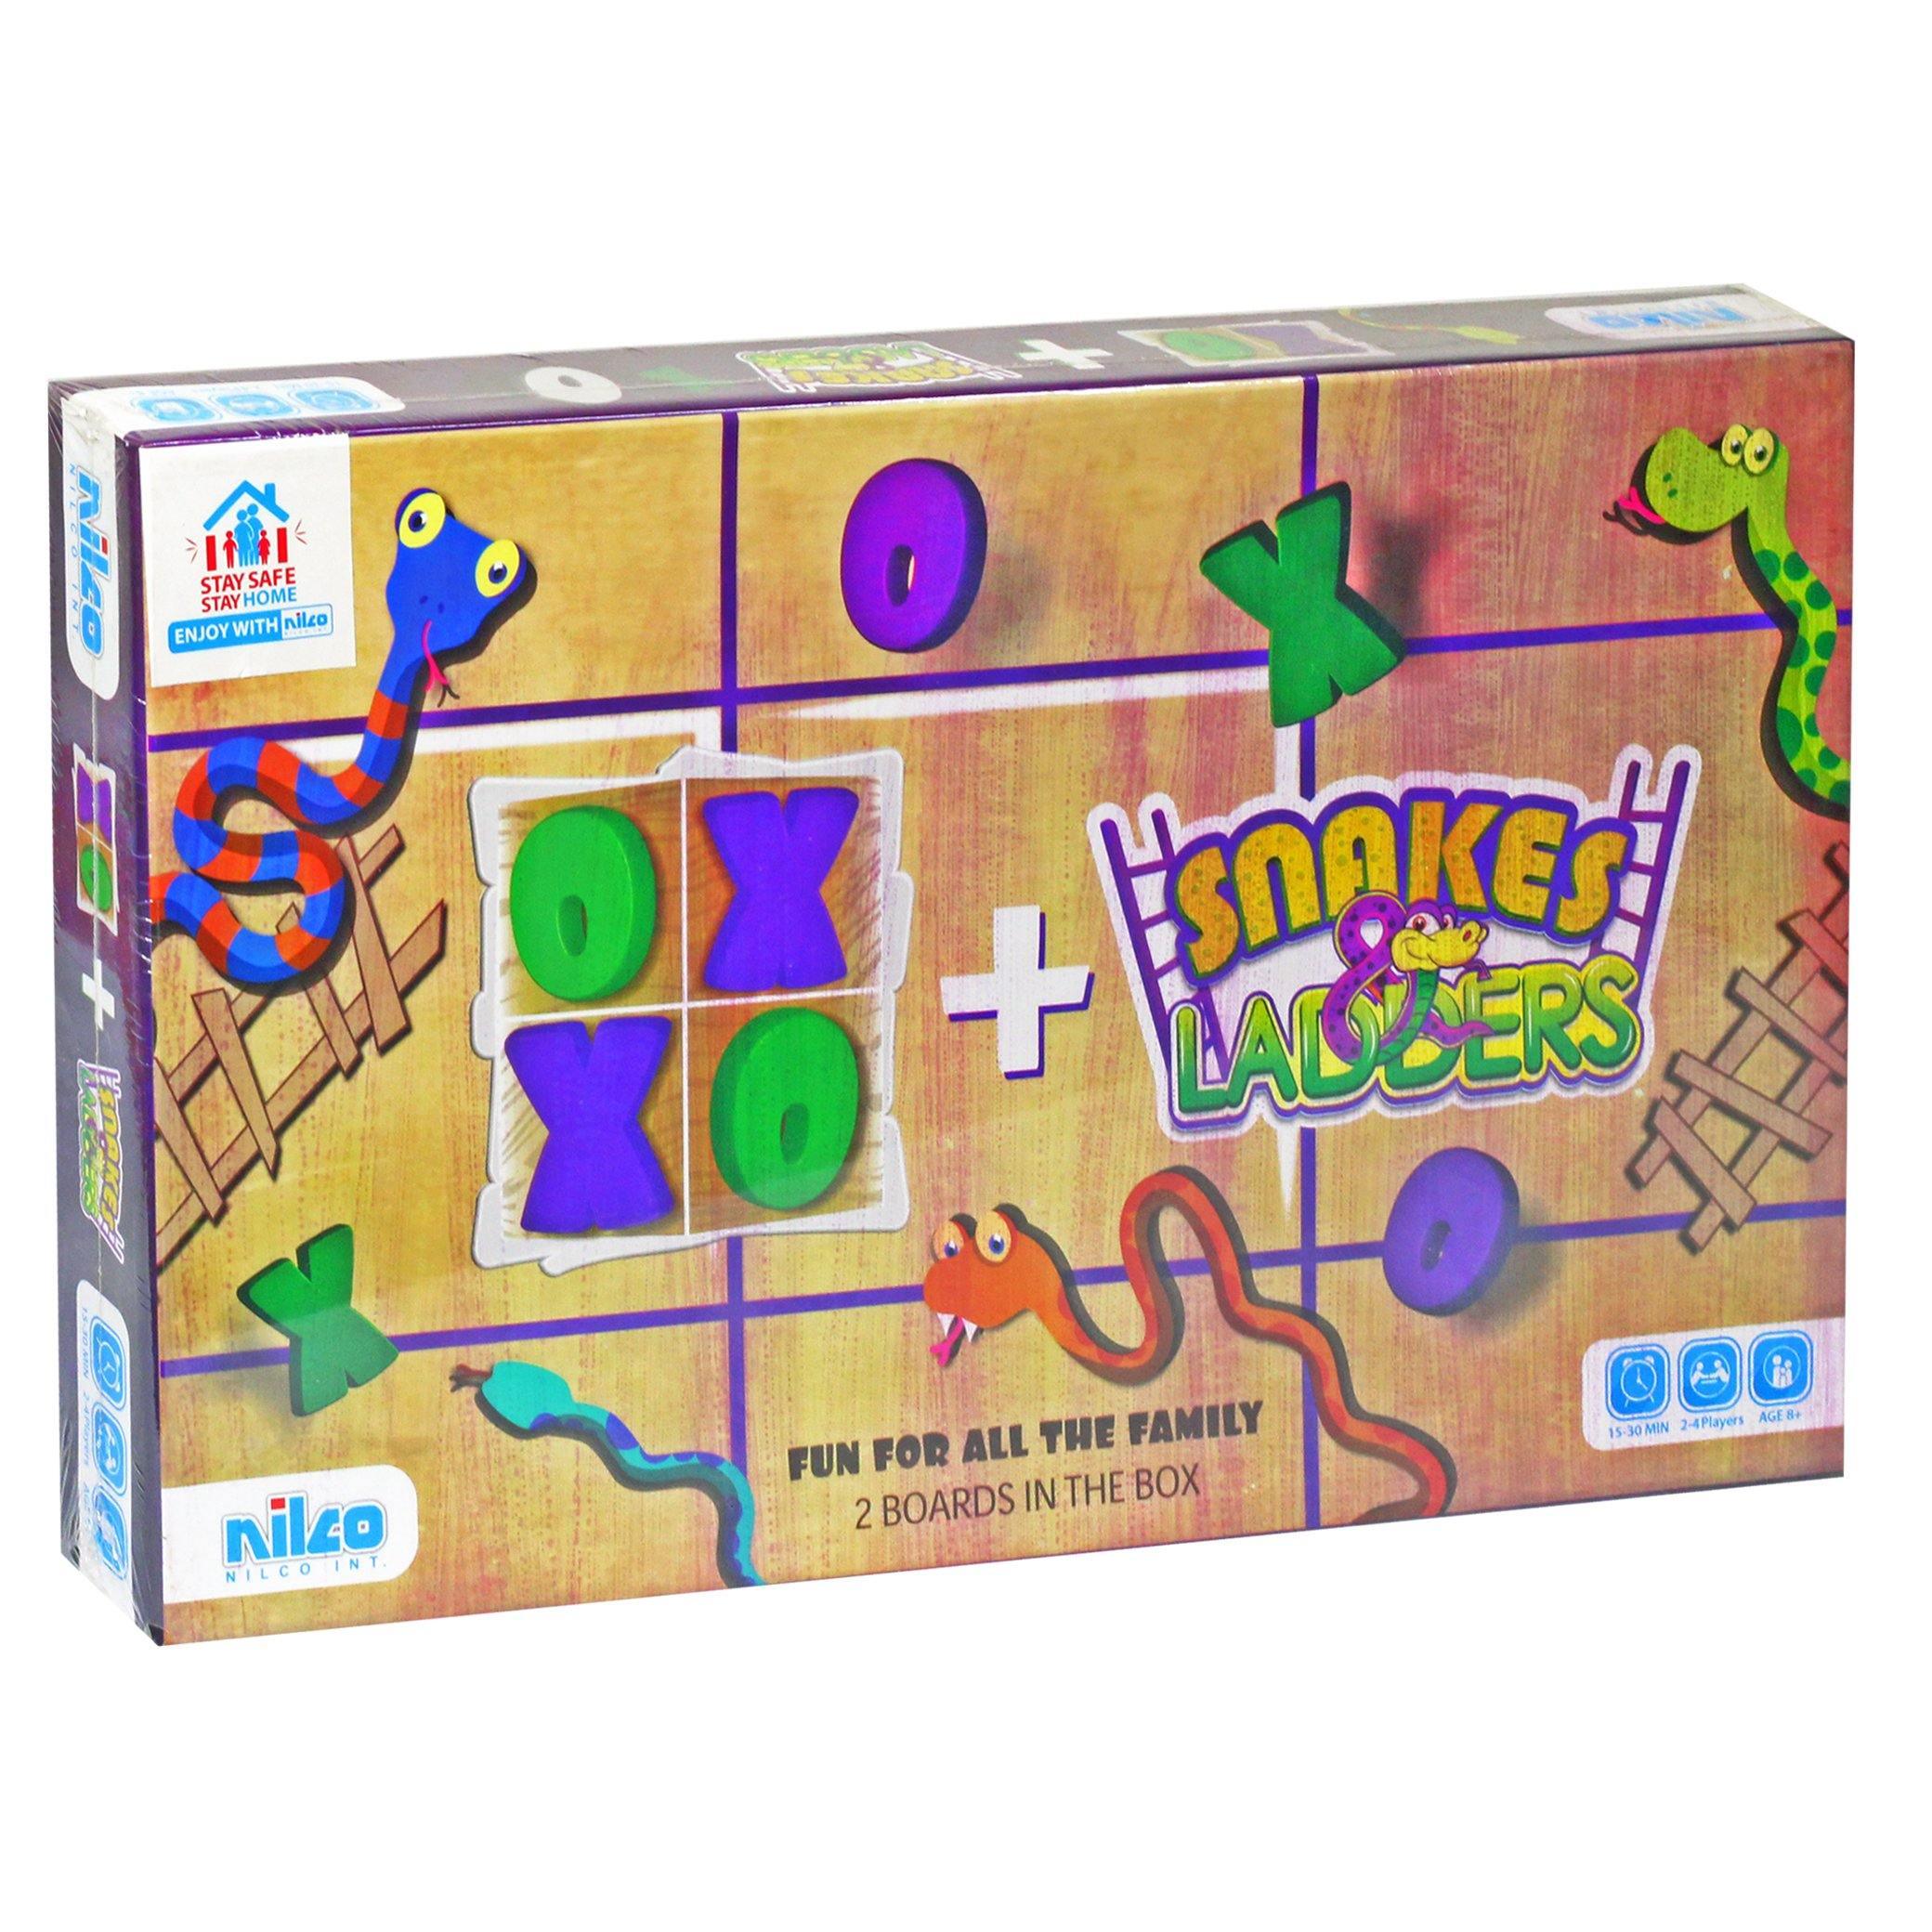 Nilco 1020 Snakes Ladders & XO Board Game - BumbleToys - 8-13 Years, Card & Board Games, Nilco, Puzzle & Board & Card Games, Unisex